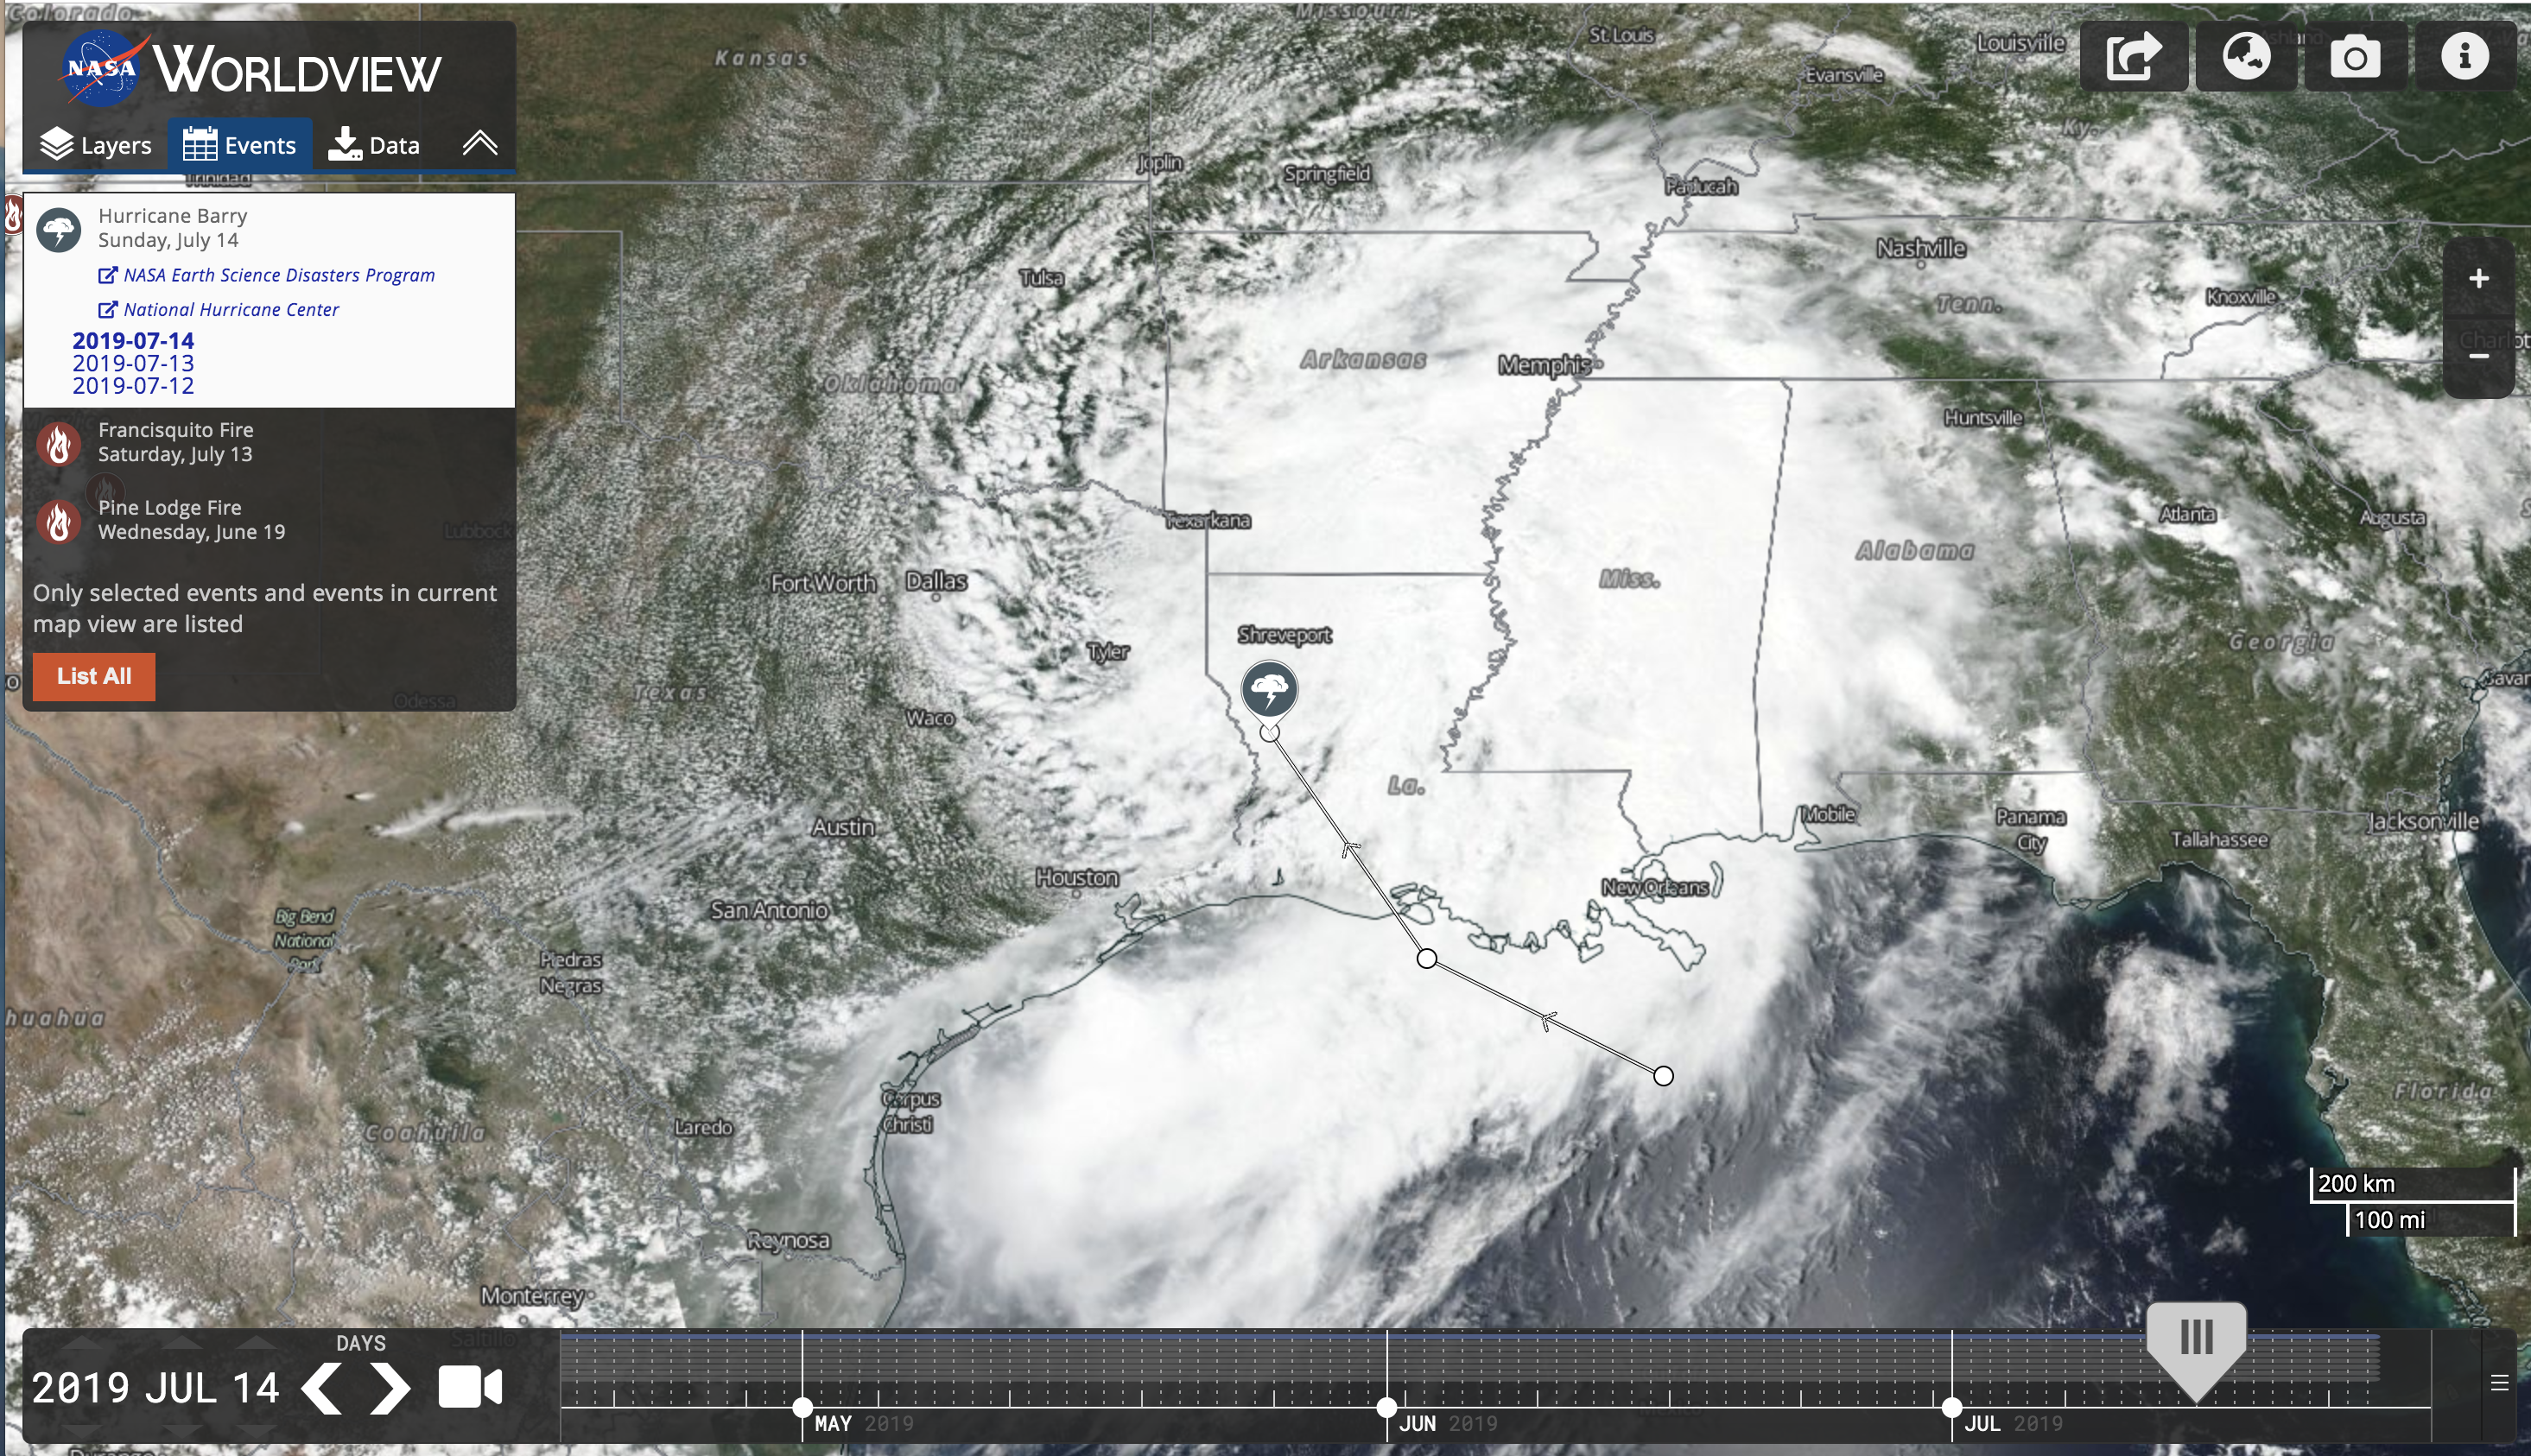 Worldview's Events tab provides information about events, such as tropical cyclones, wildfires, volcanic eruptions, and even large iceberg movement. Hurricane Barry, as shown in this image, traveled from the Gulf into Louisiana in July 2019.